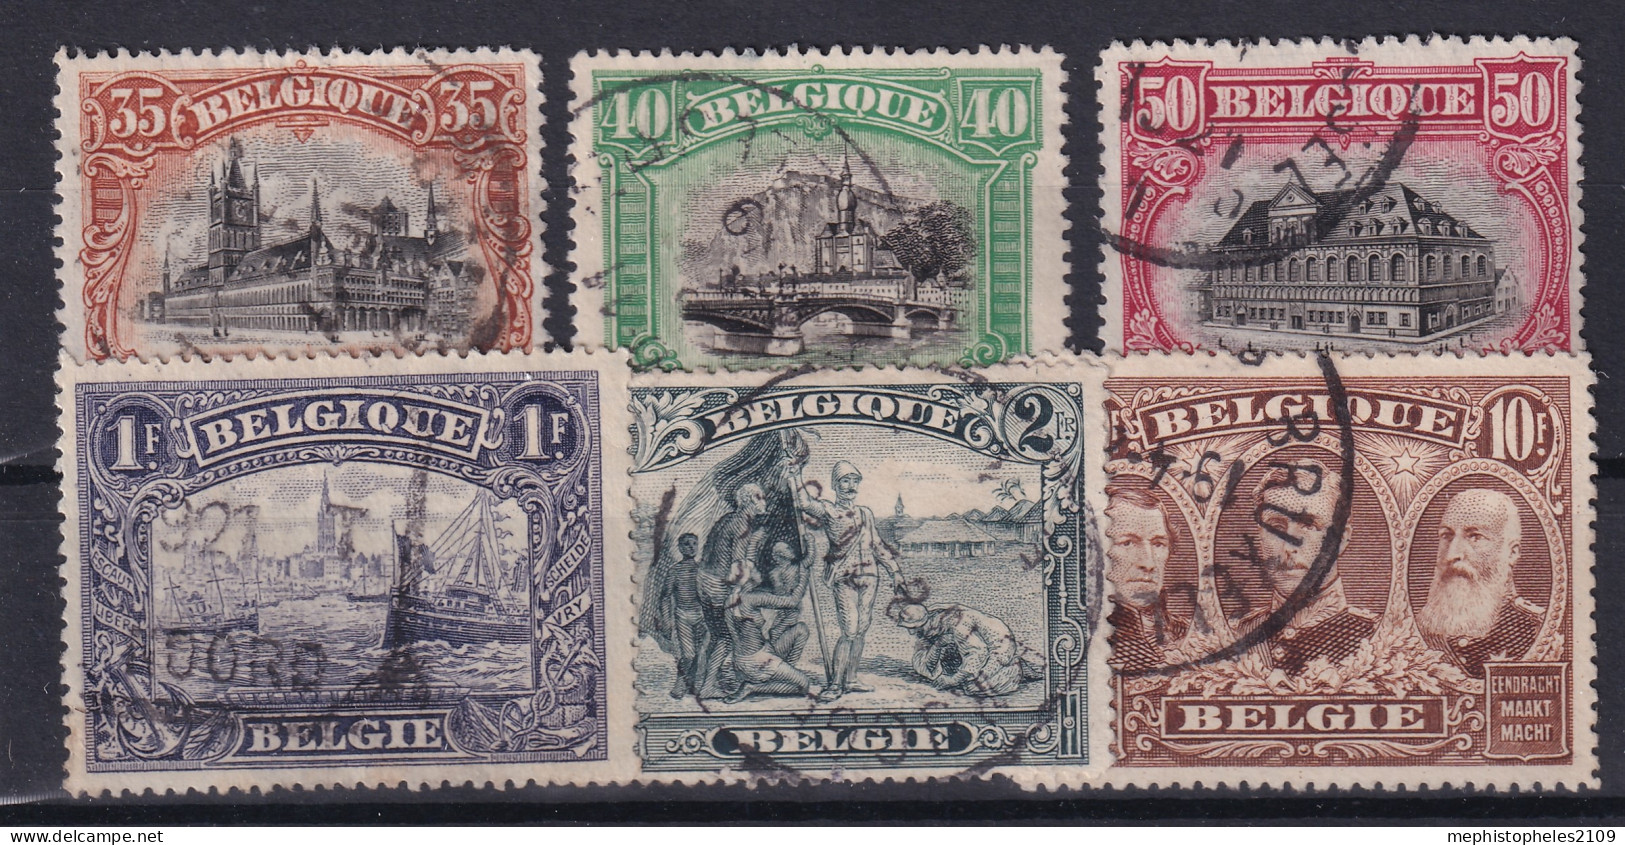 BELGIUM 1928 - Canceled - Sc# 116a, 117a, 118a, 119a, 120c, 122a - Used Stamps